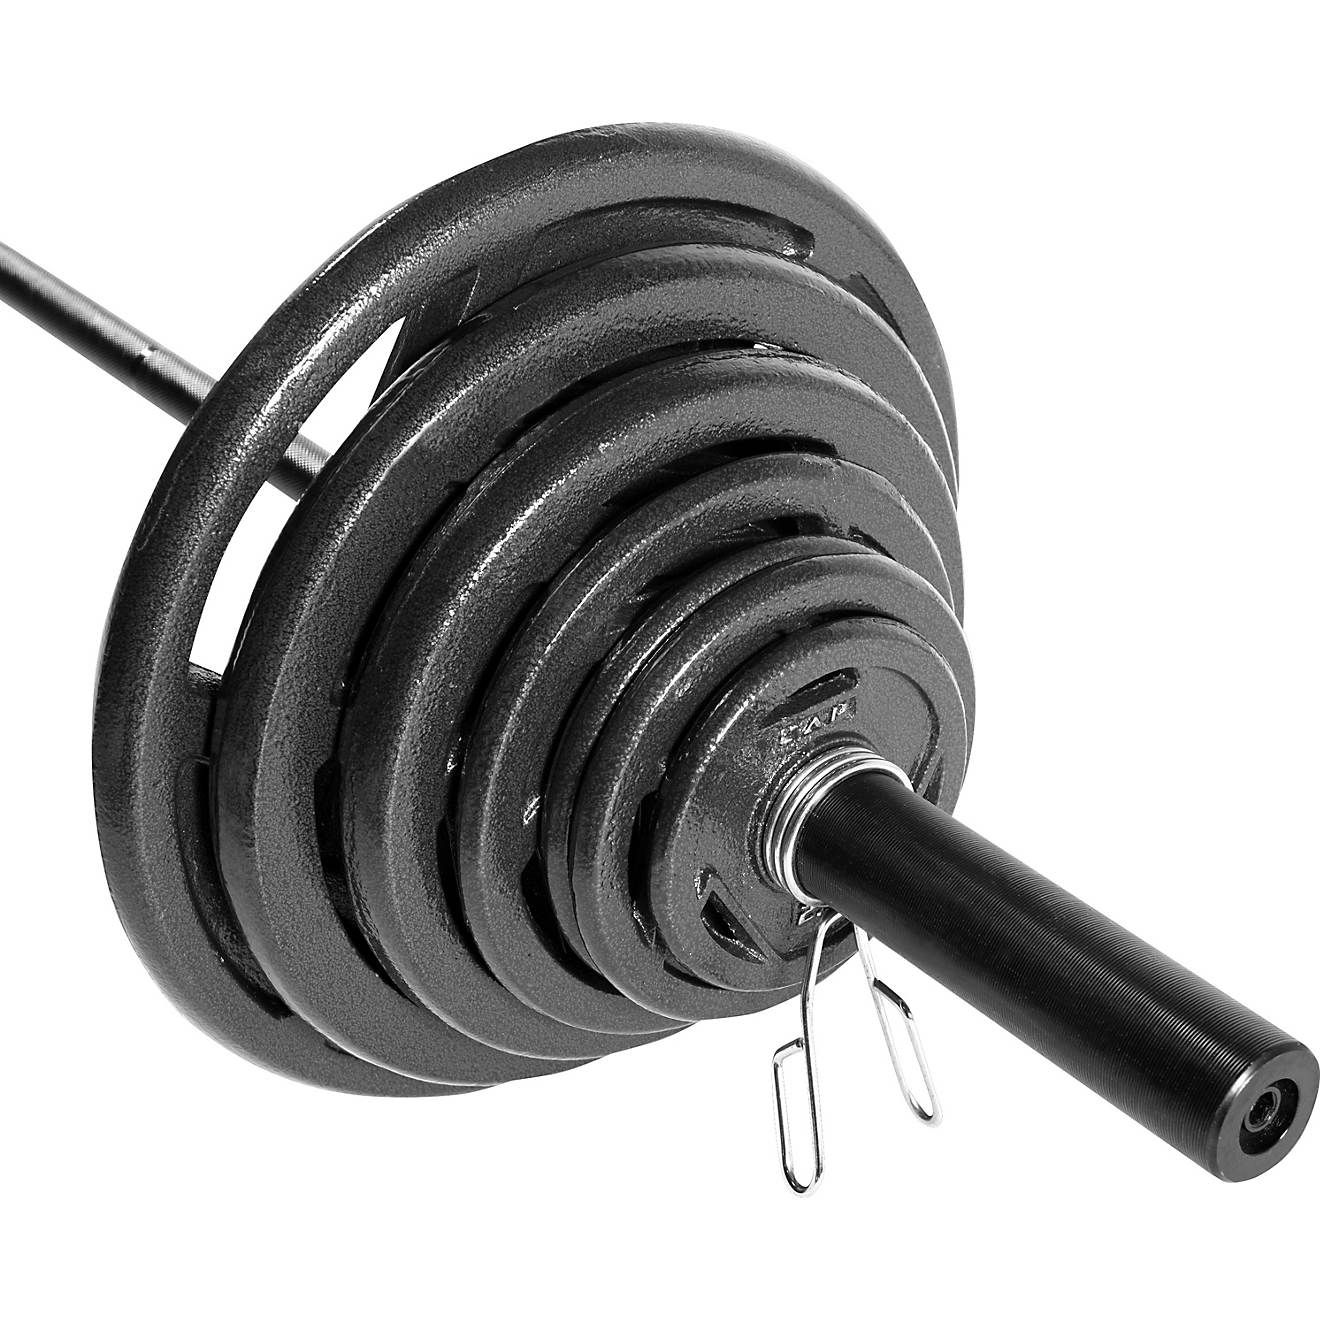 CAP Barbell 300 lb. Olympic Grip Weight Set | Academy | Academy Sports + Outdoors